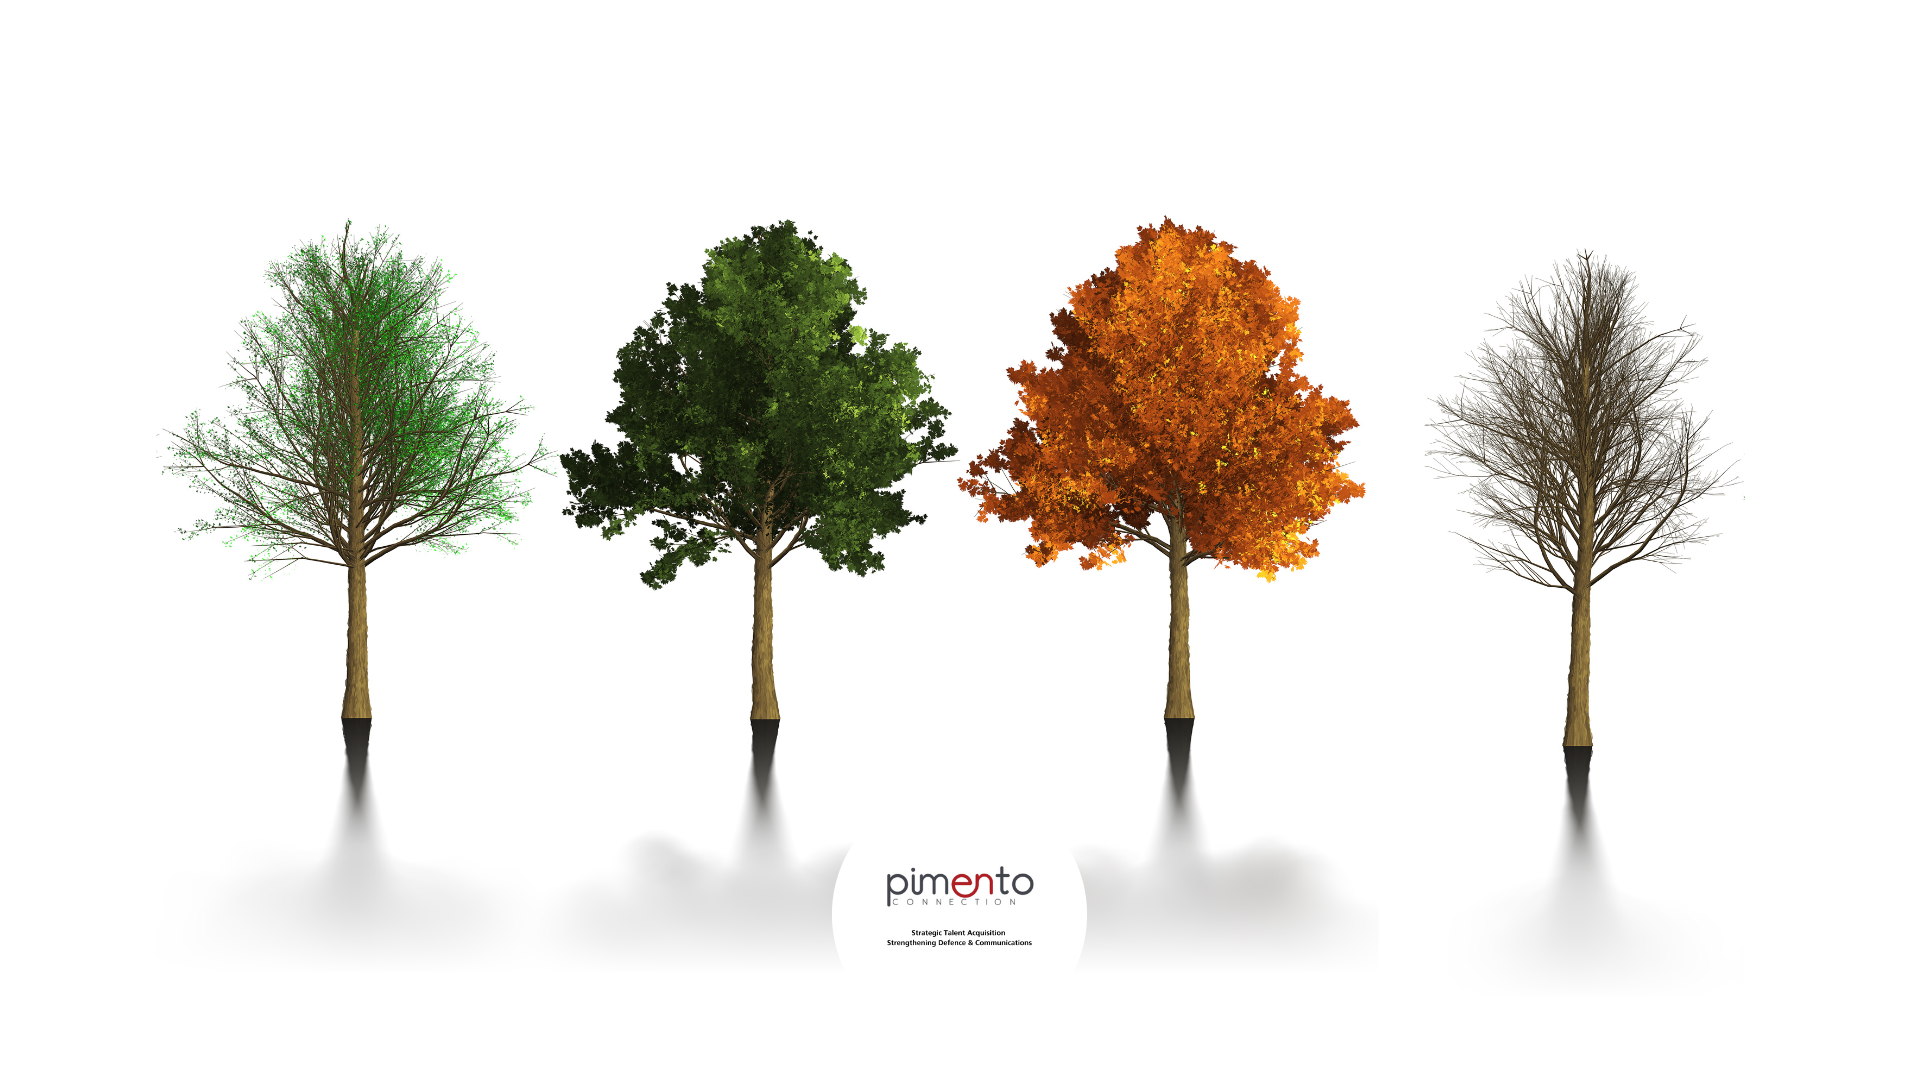 four trees showing he four seasons